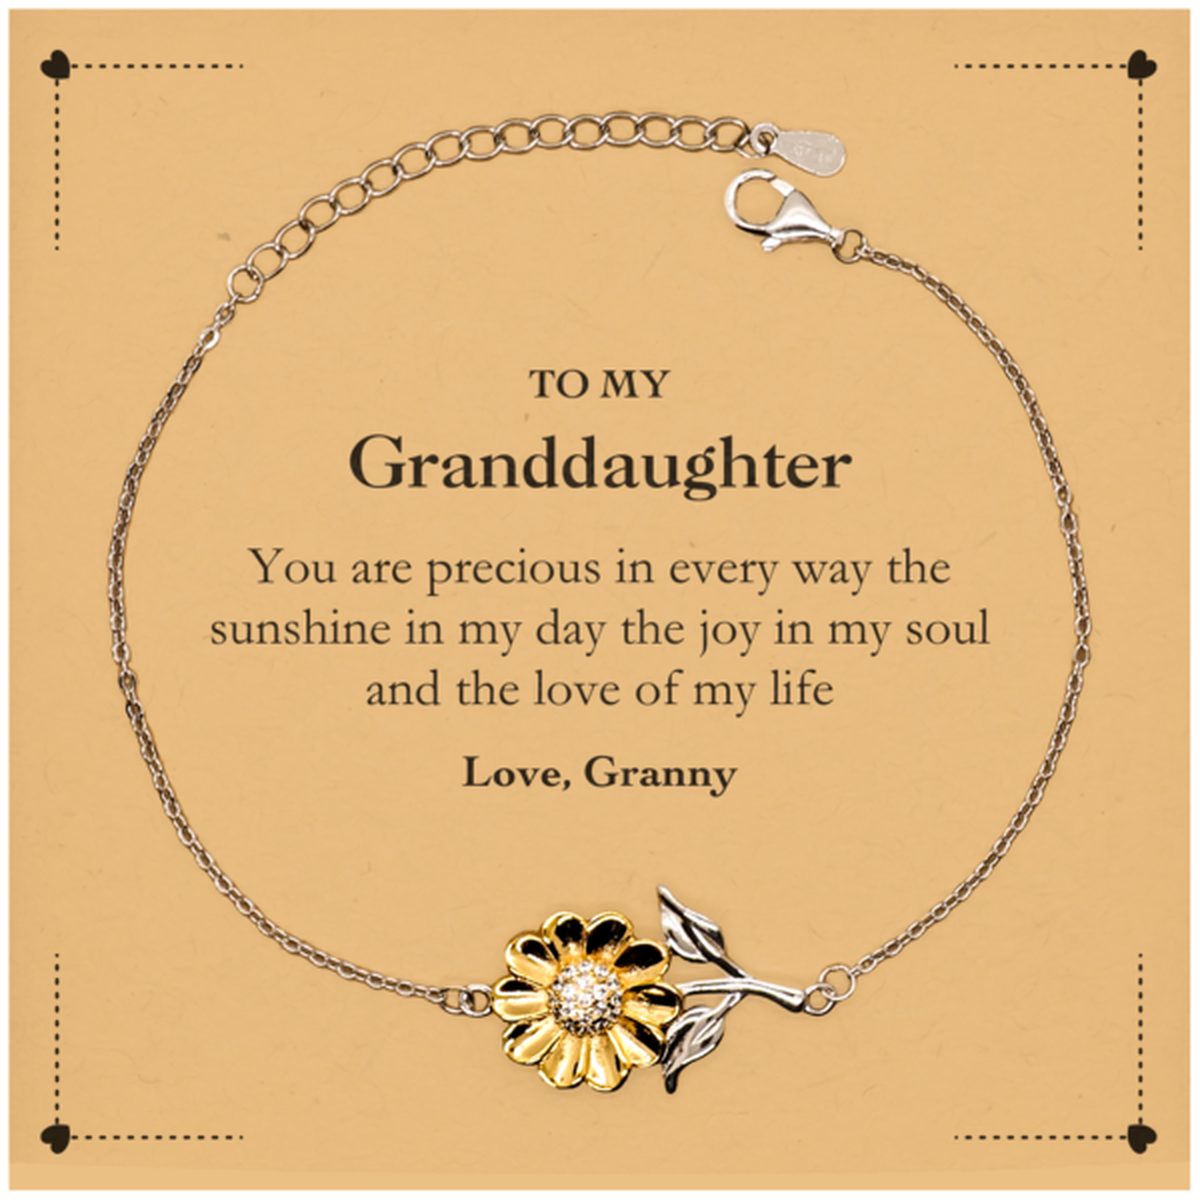 Graduation Gifts for Granddaughter Sunflower Bracelet Present from Granny, Christmas Granddaughter Birthday Gifts Granddaughter You are precious in every way the sunshine in my day. Love, Granny